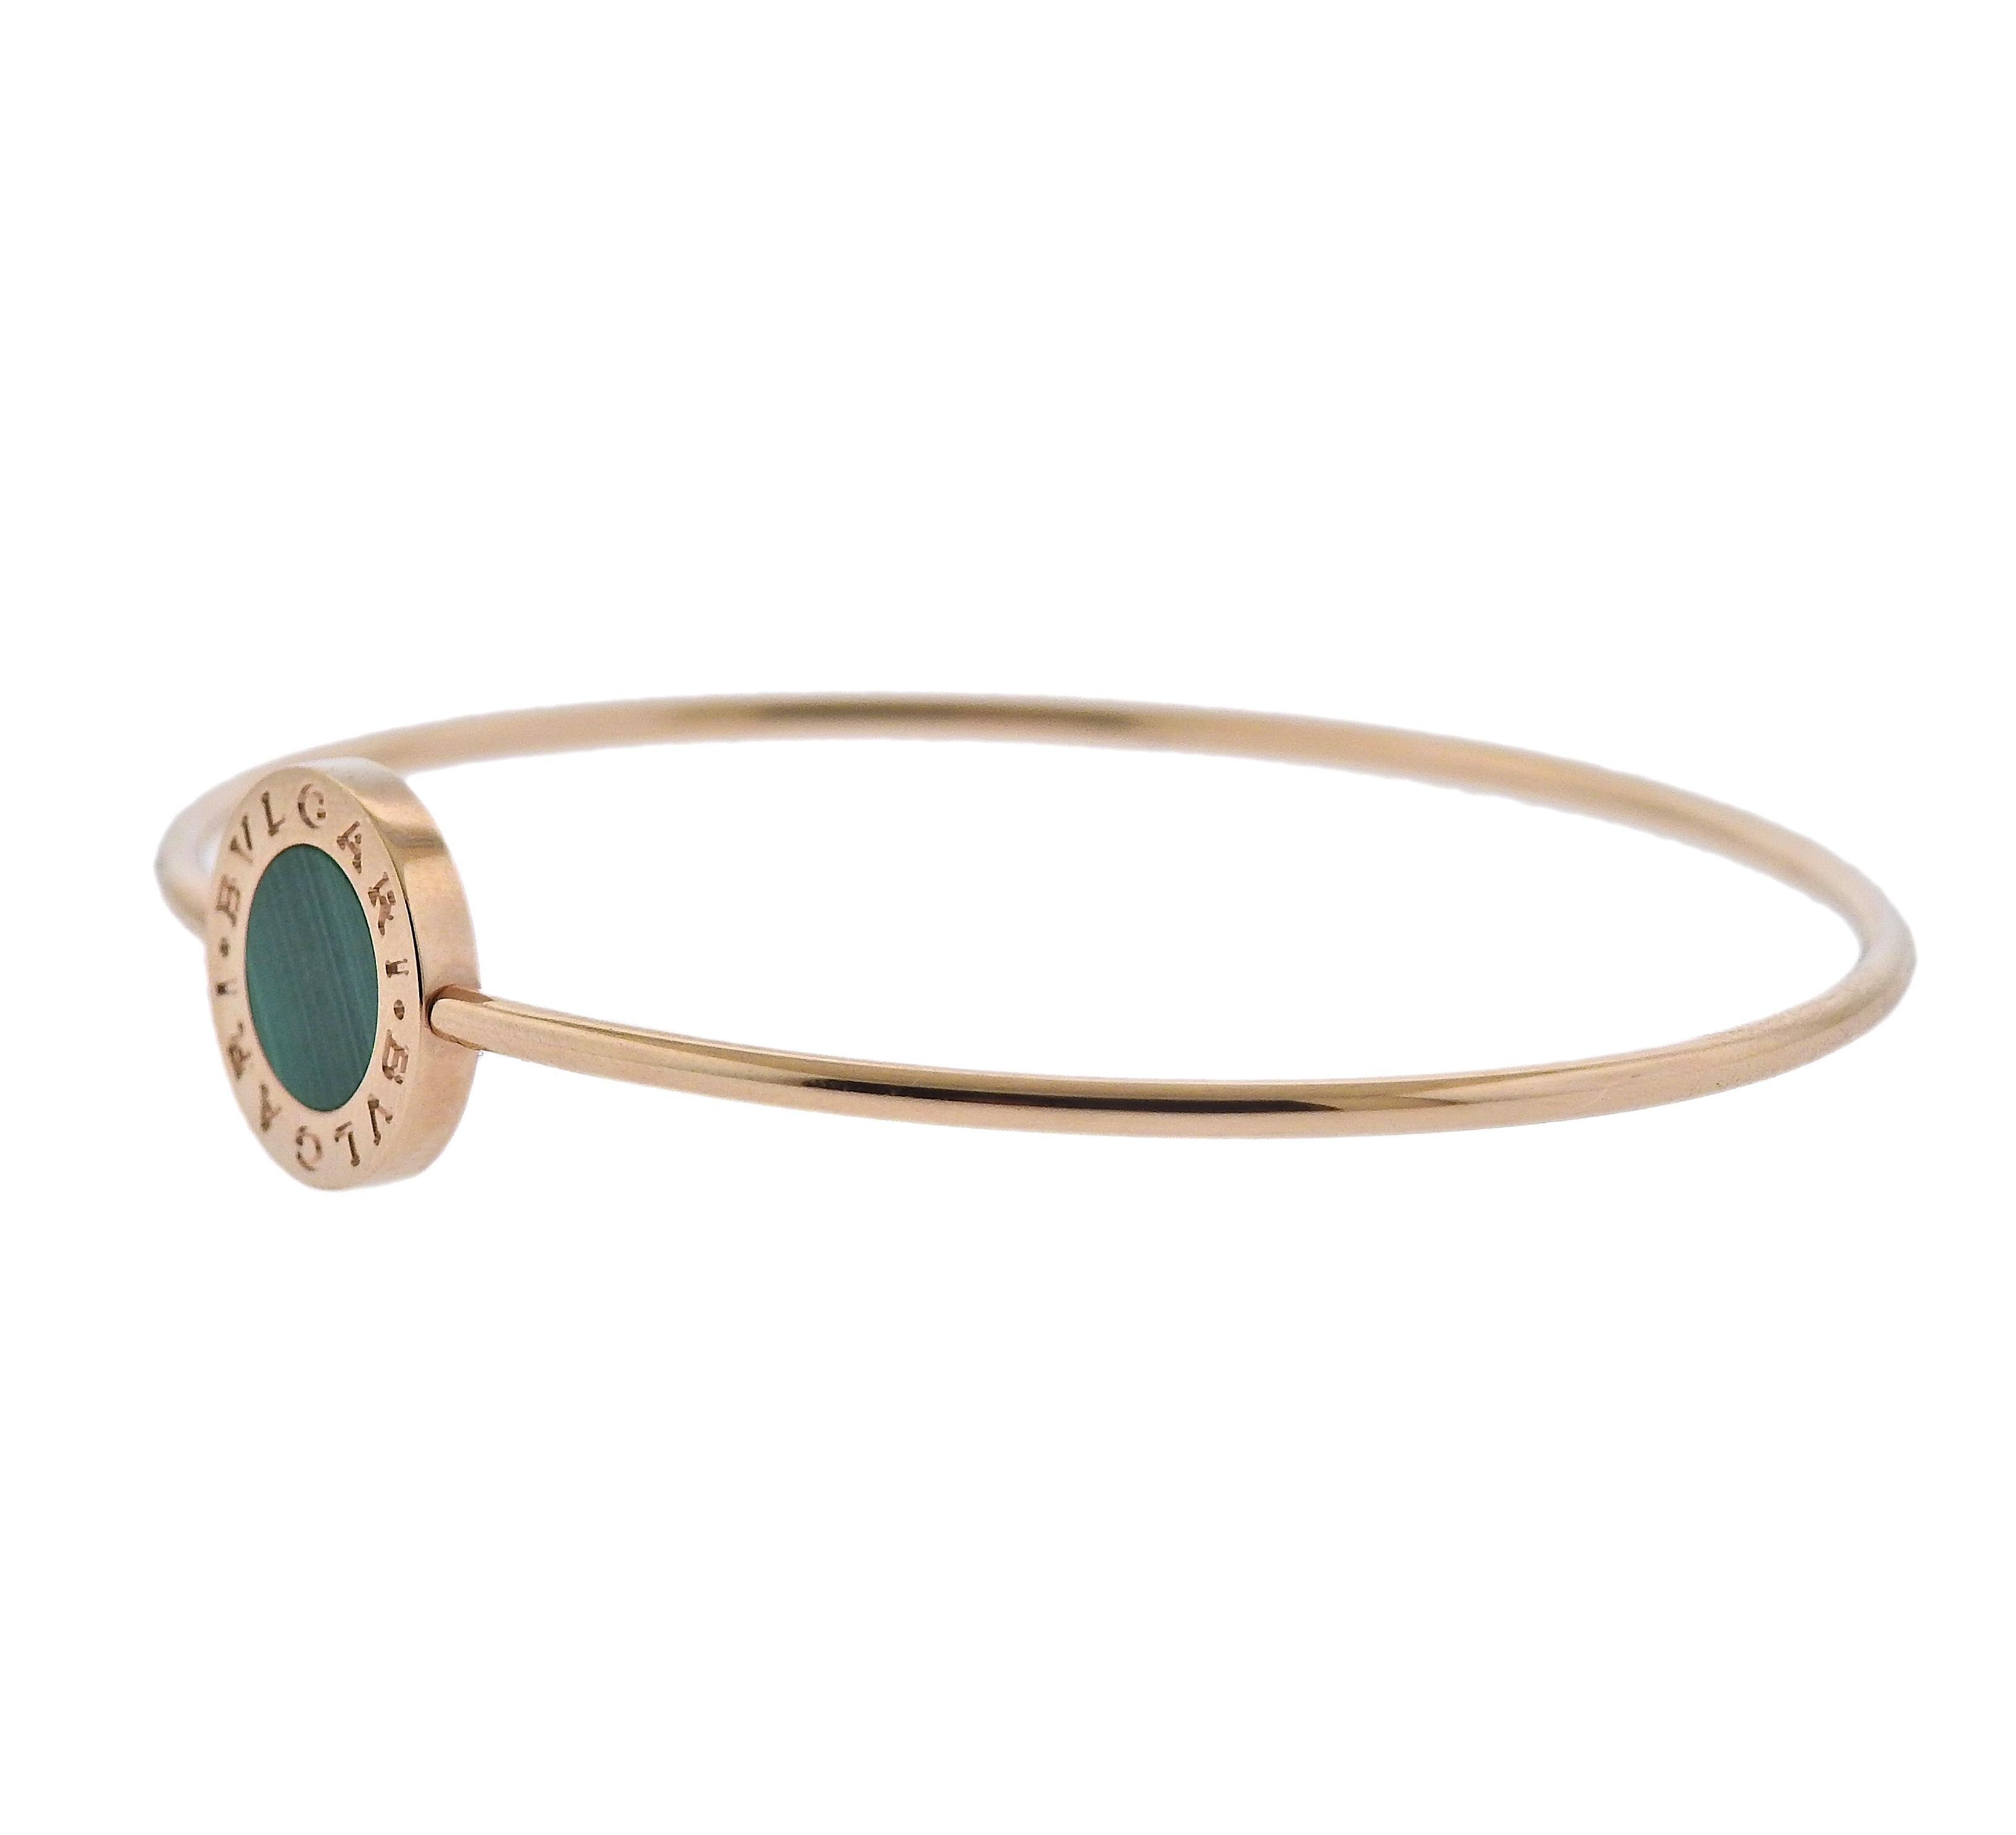 Bulgari 18k rose gold bangle bracelet with malachite. Retail $1950, comes with box and COA. Bracelet will fit approx. 7